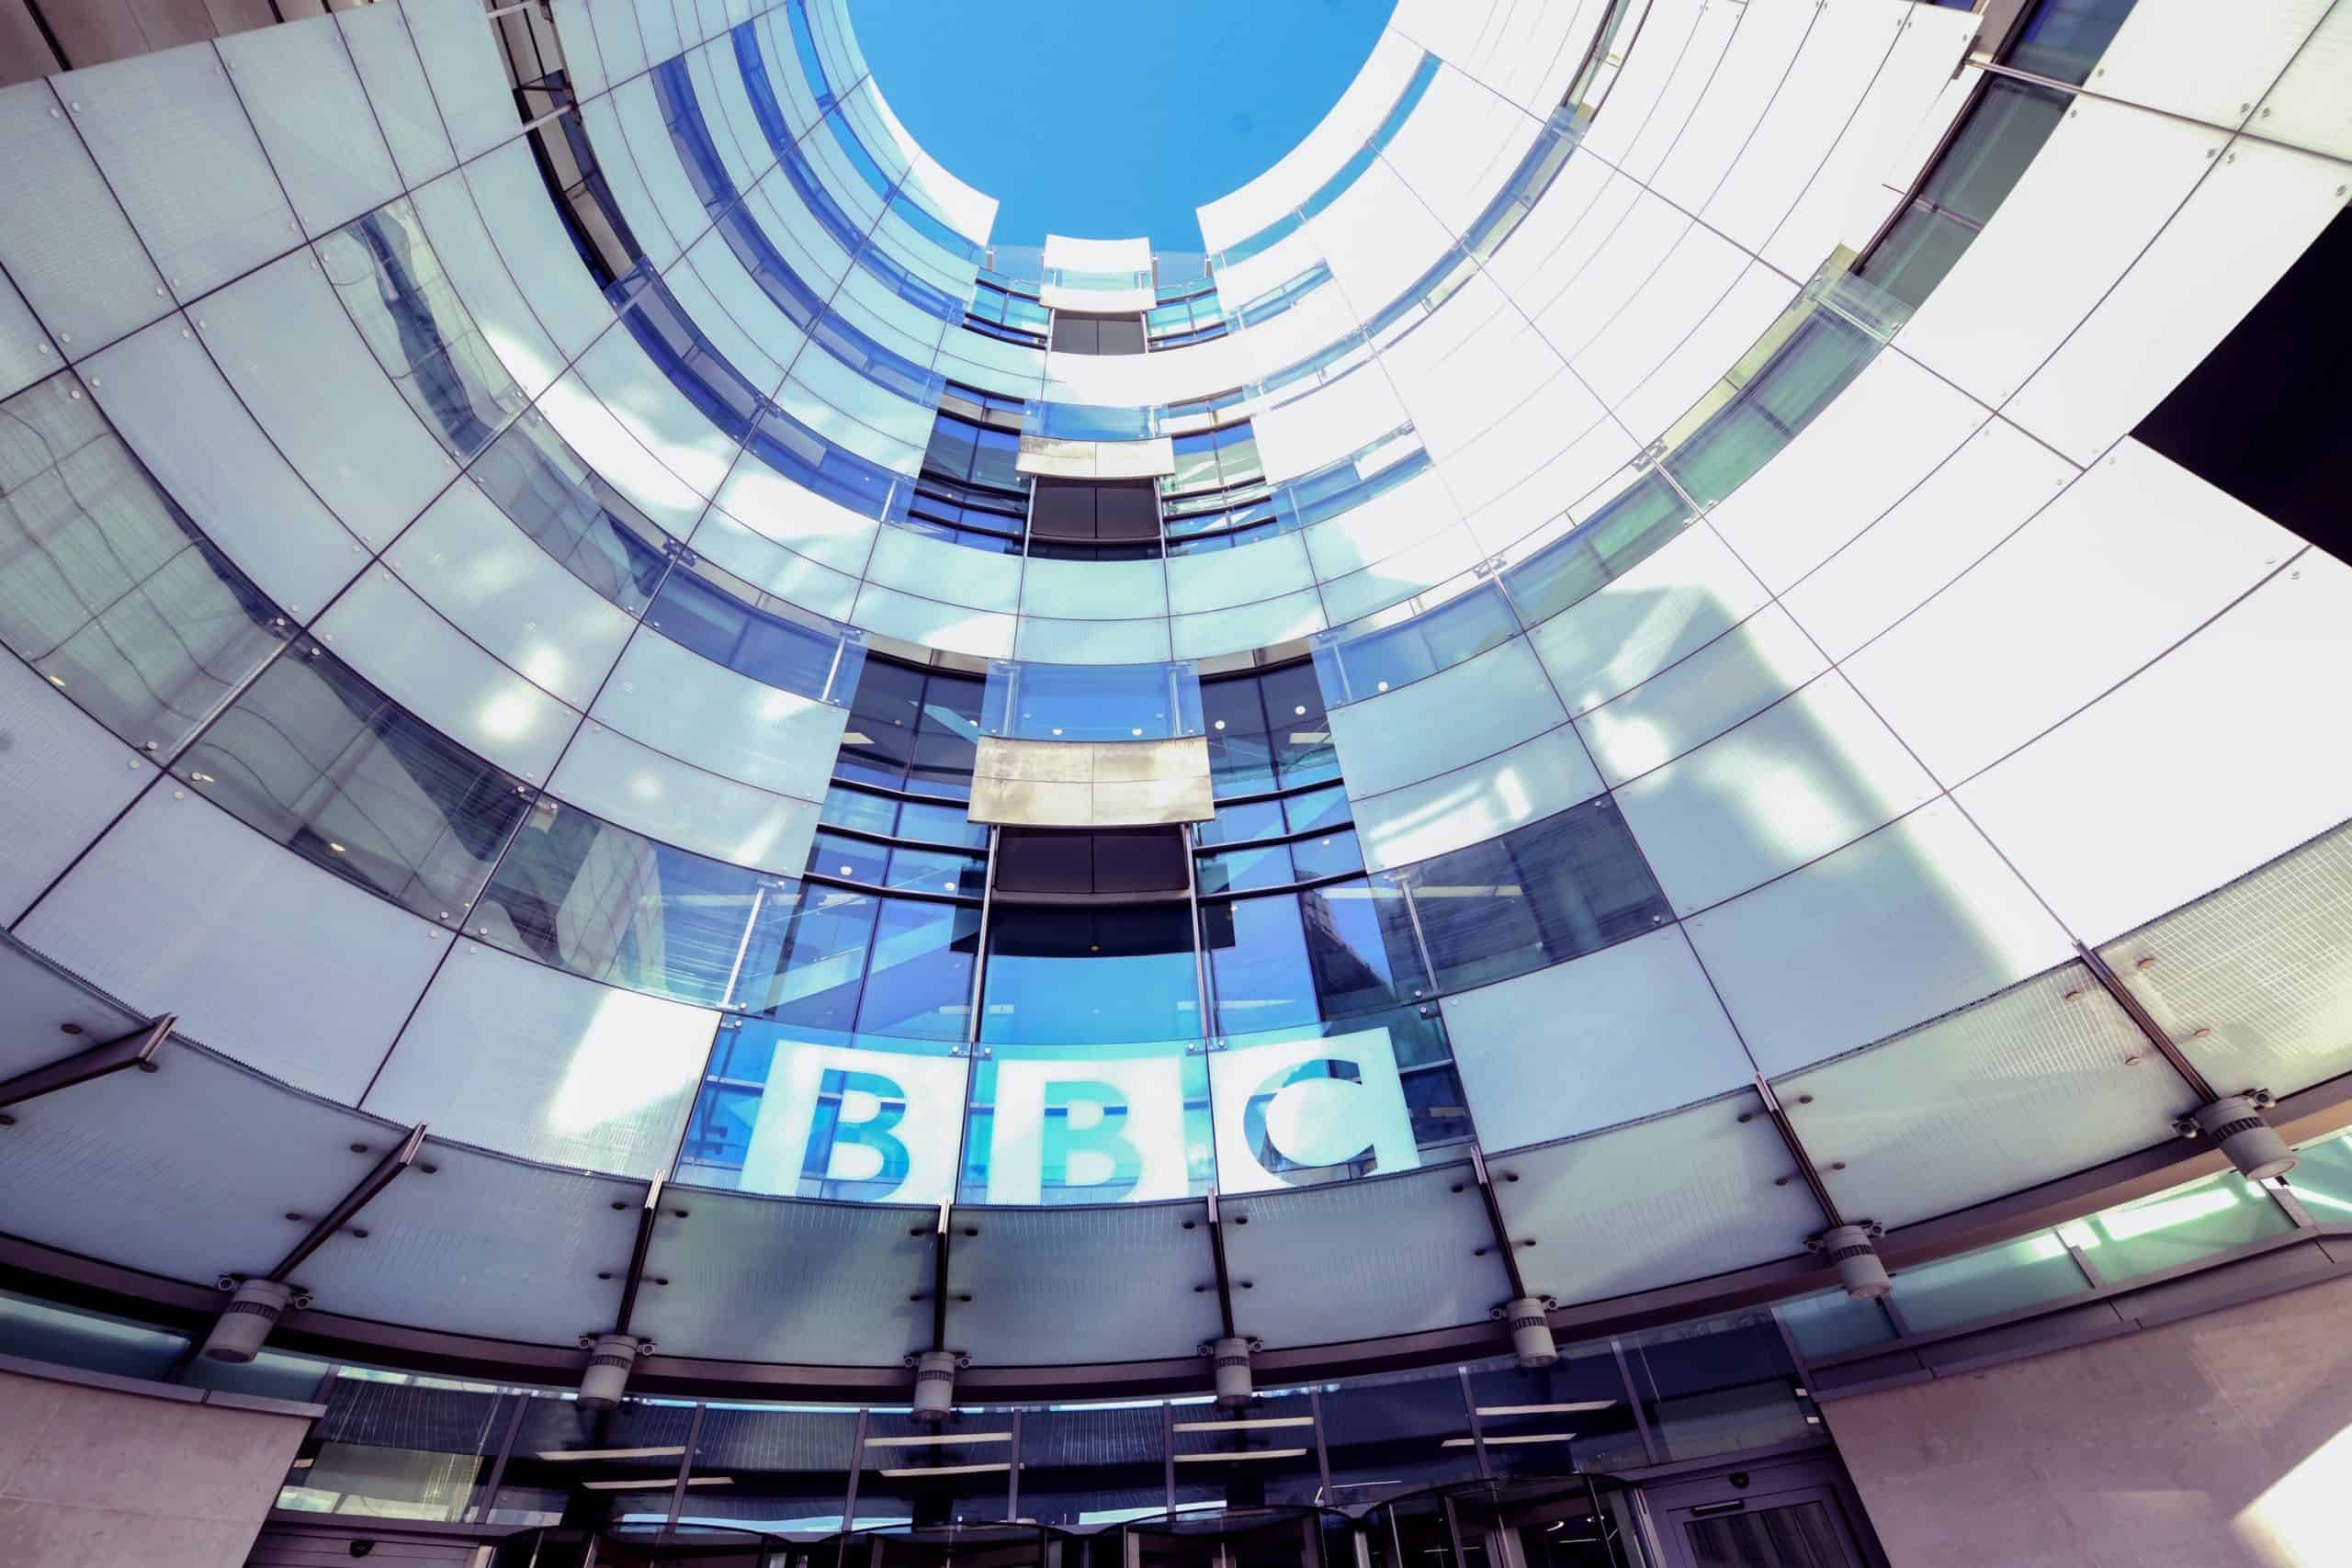 ‘Deeply worrying’ concerns over BBC impartiality raised after Tory ally blocks appointment of senior reporter